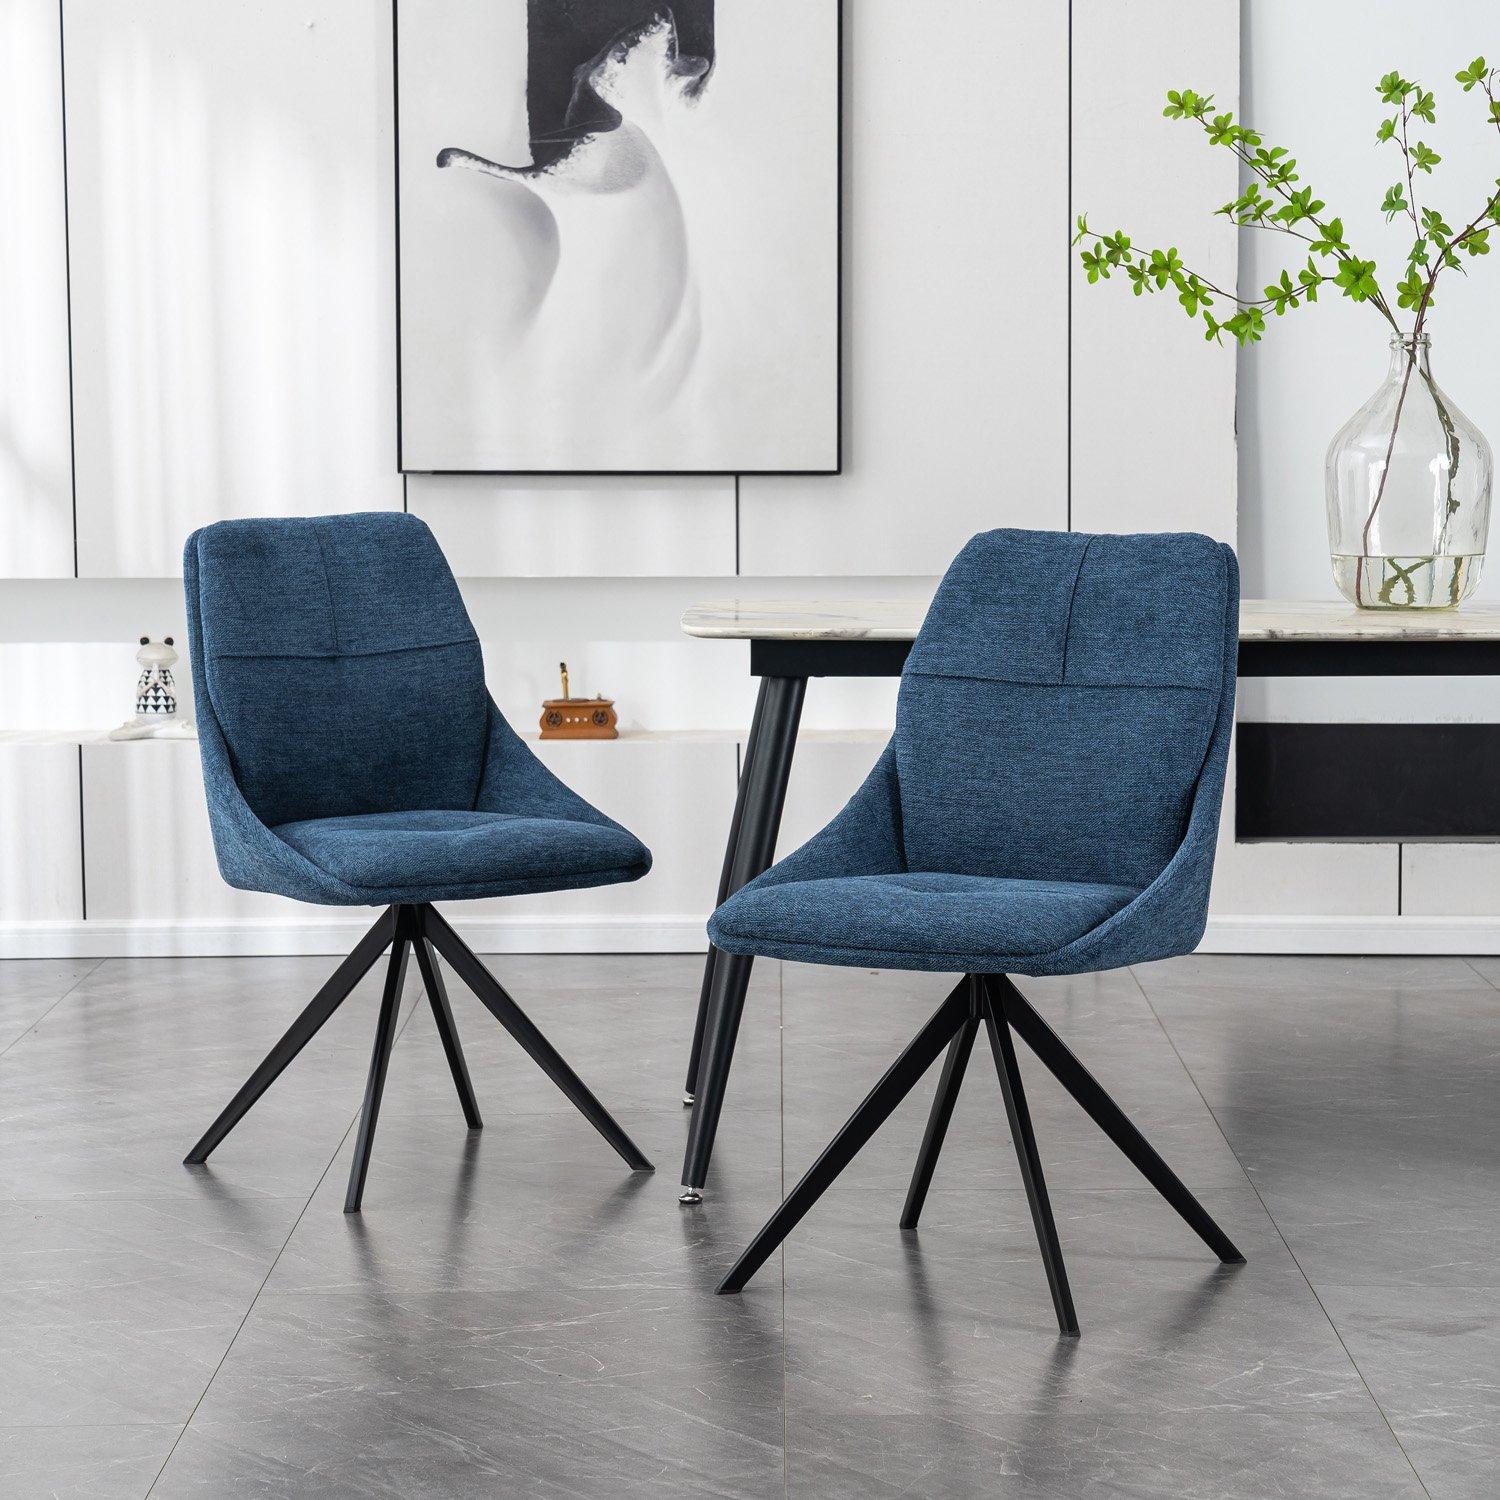 Set of 6 Luna Modern Fabric Dining Chair Padded Seat w Arms Metal Legs